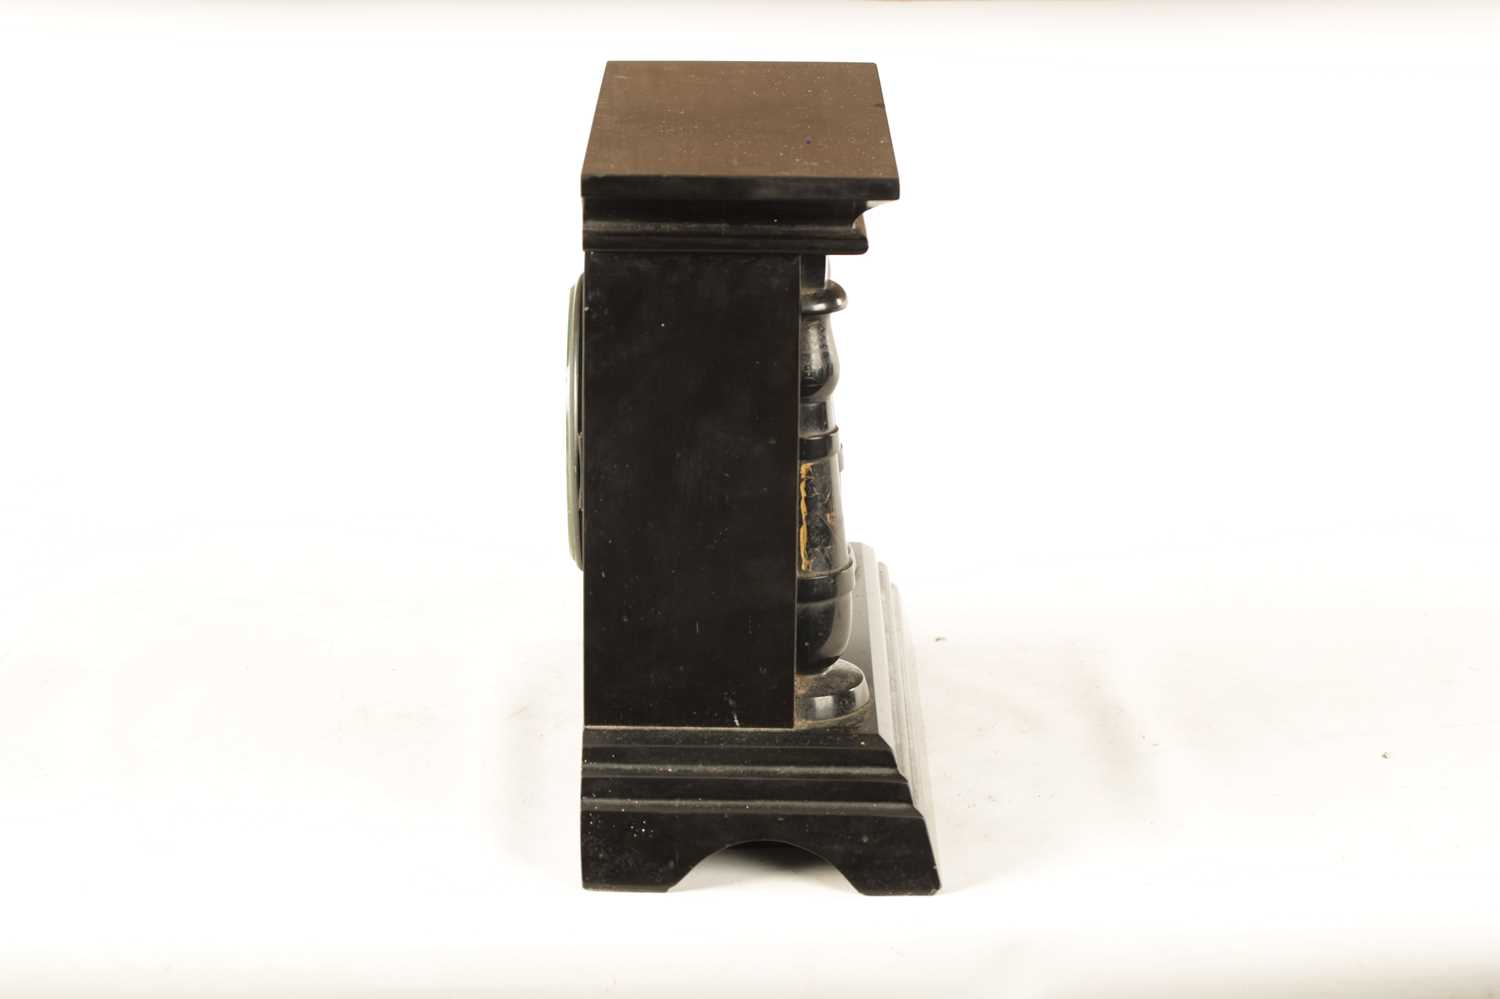 AN ENGLISH REGENCY EGYPTIAN REVIVAL FUSEE MANTEL CLOCK - Image 8 of 12